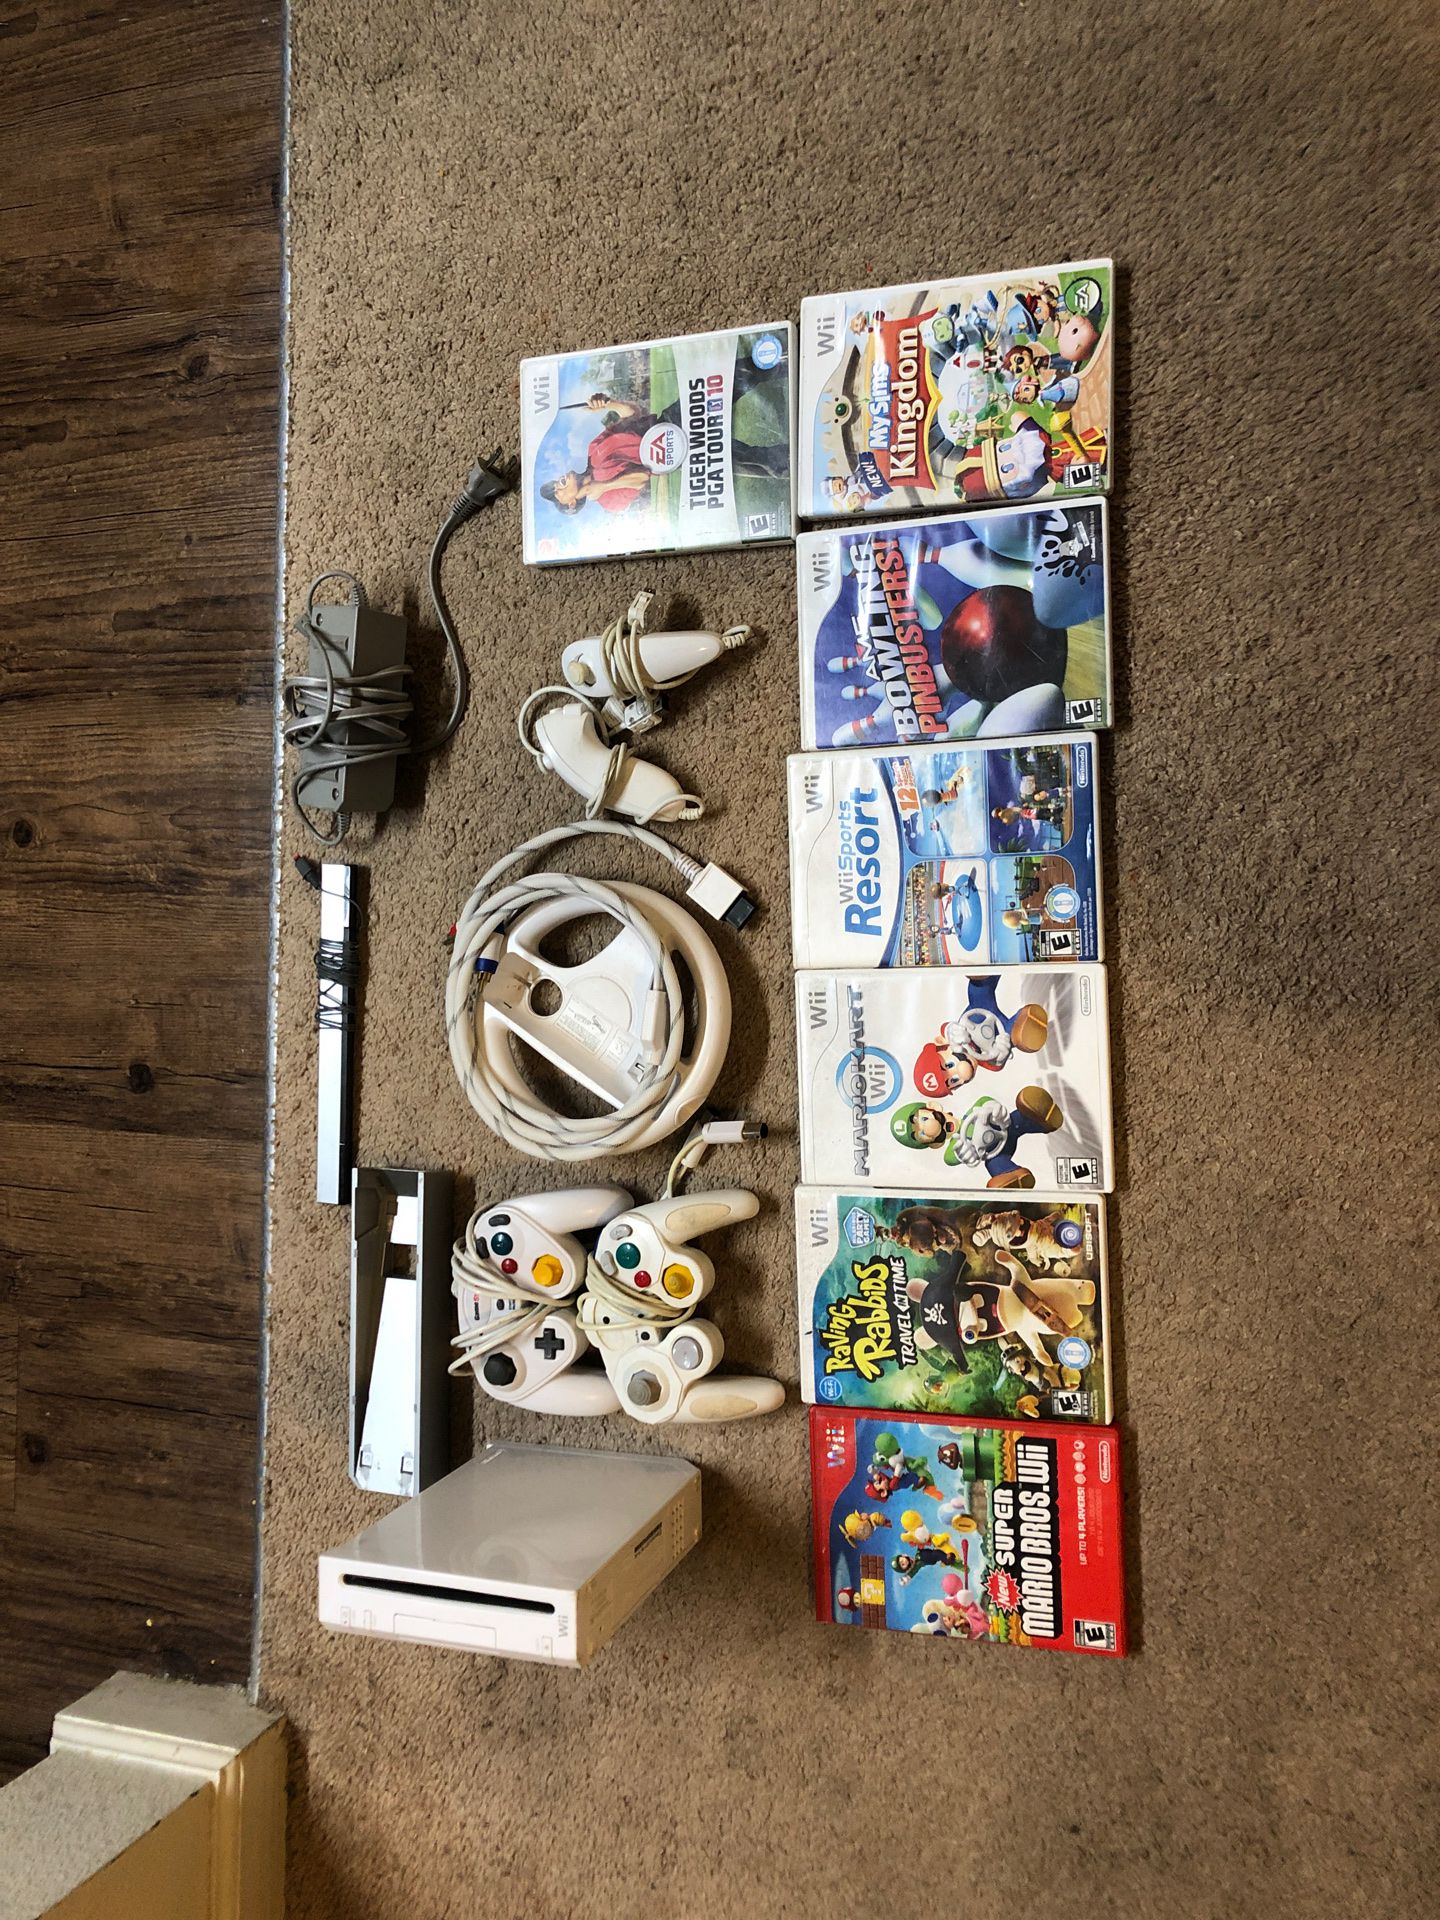 Nintendo wii with 7 games and game cube controllers